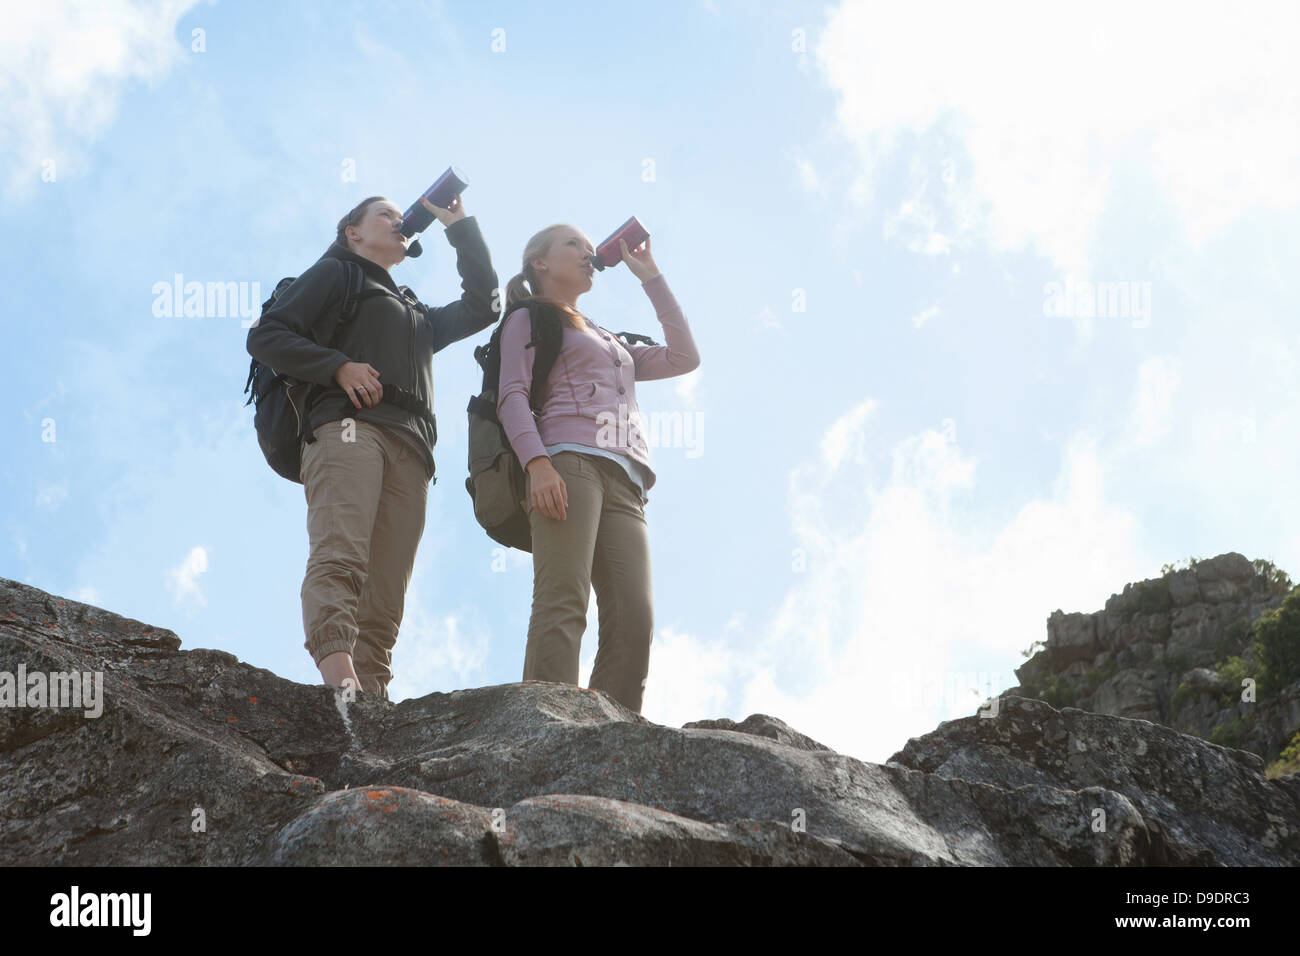 Two girl hikers drinking from flasks on top of rock formation Stock Photo